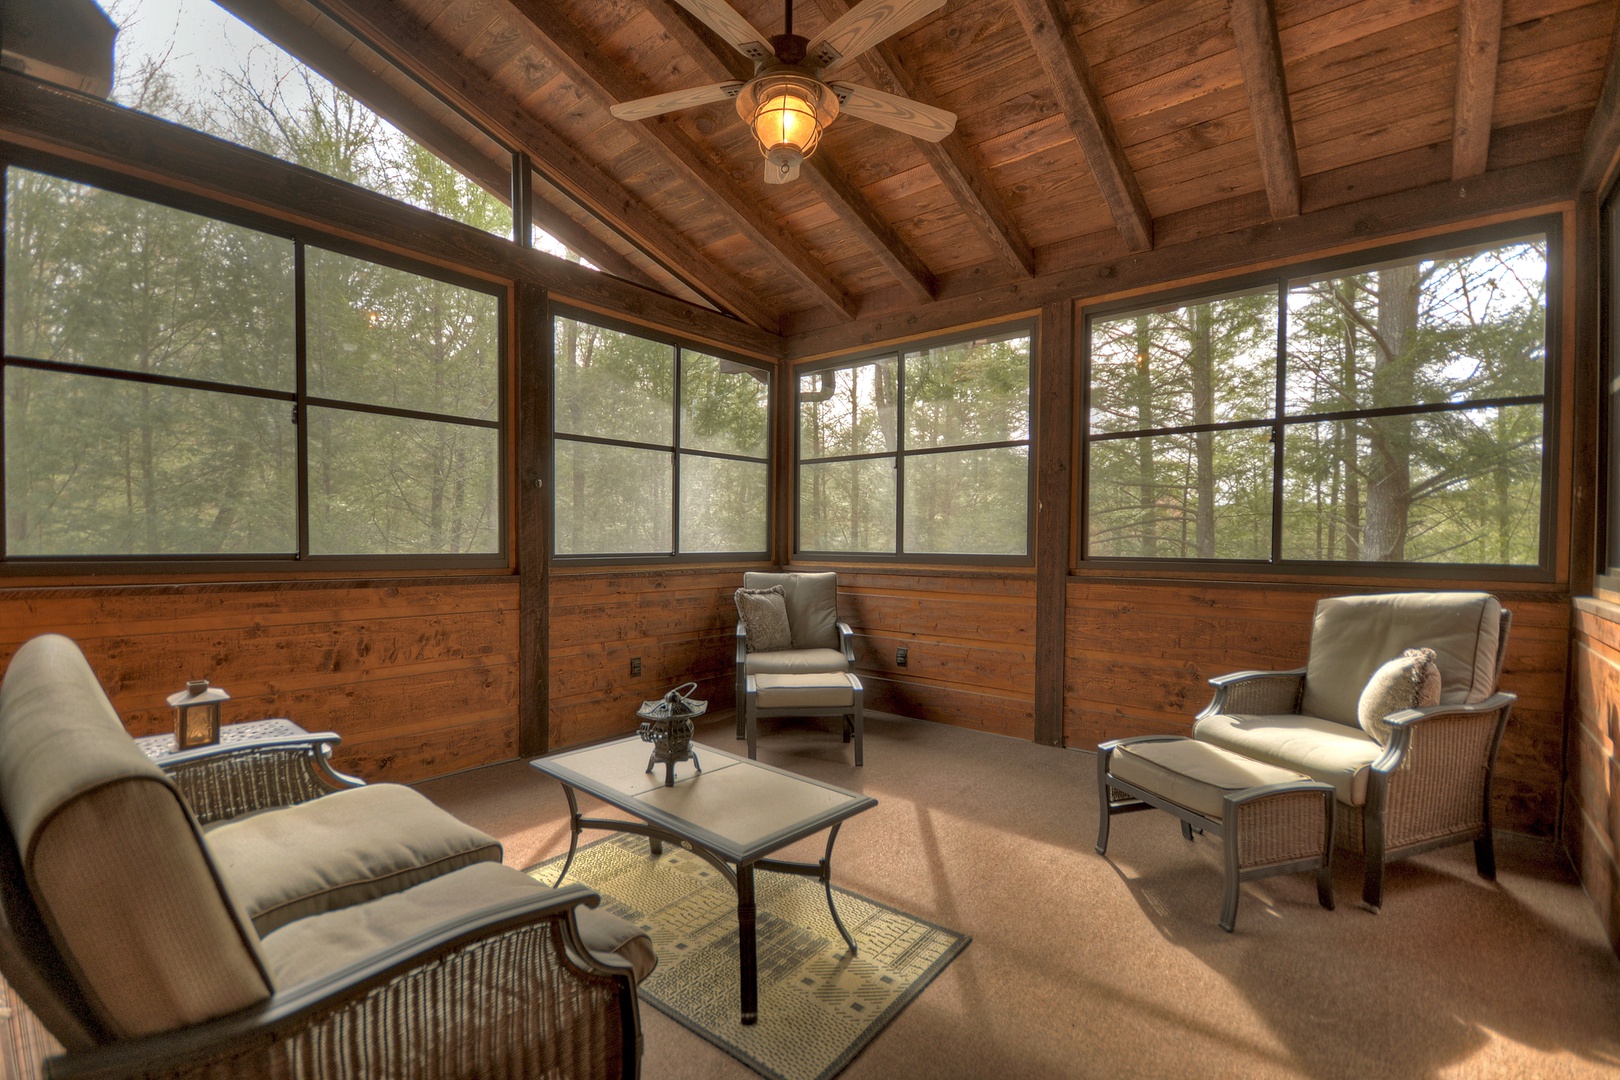 Reel Creek Lodge- Deck area with windows surrounding and outdoor seating